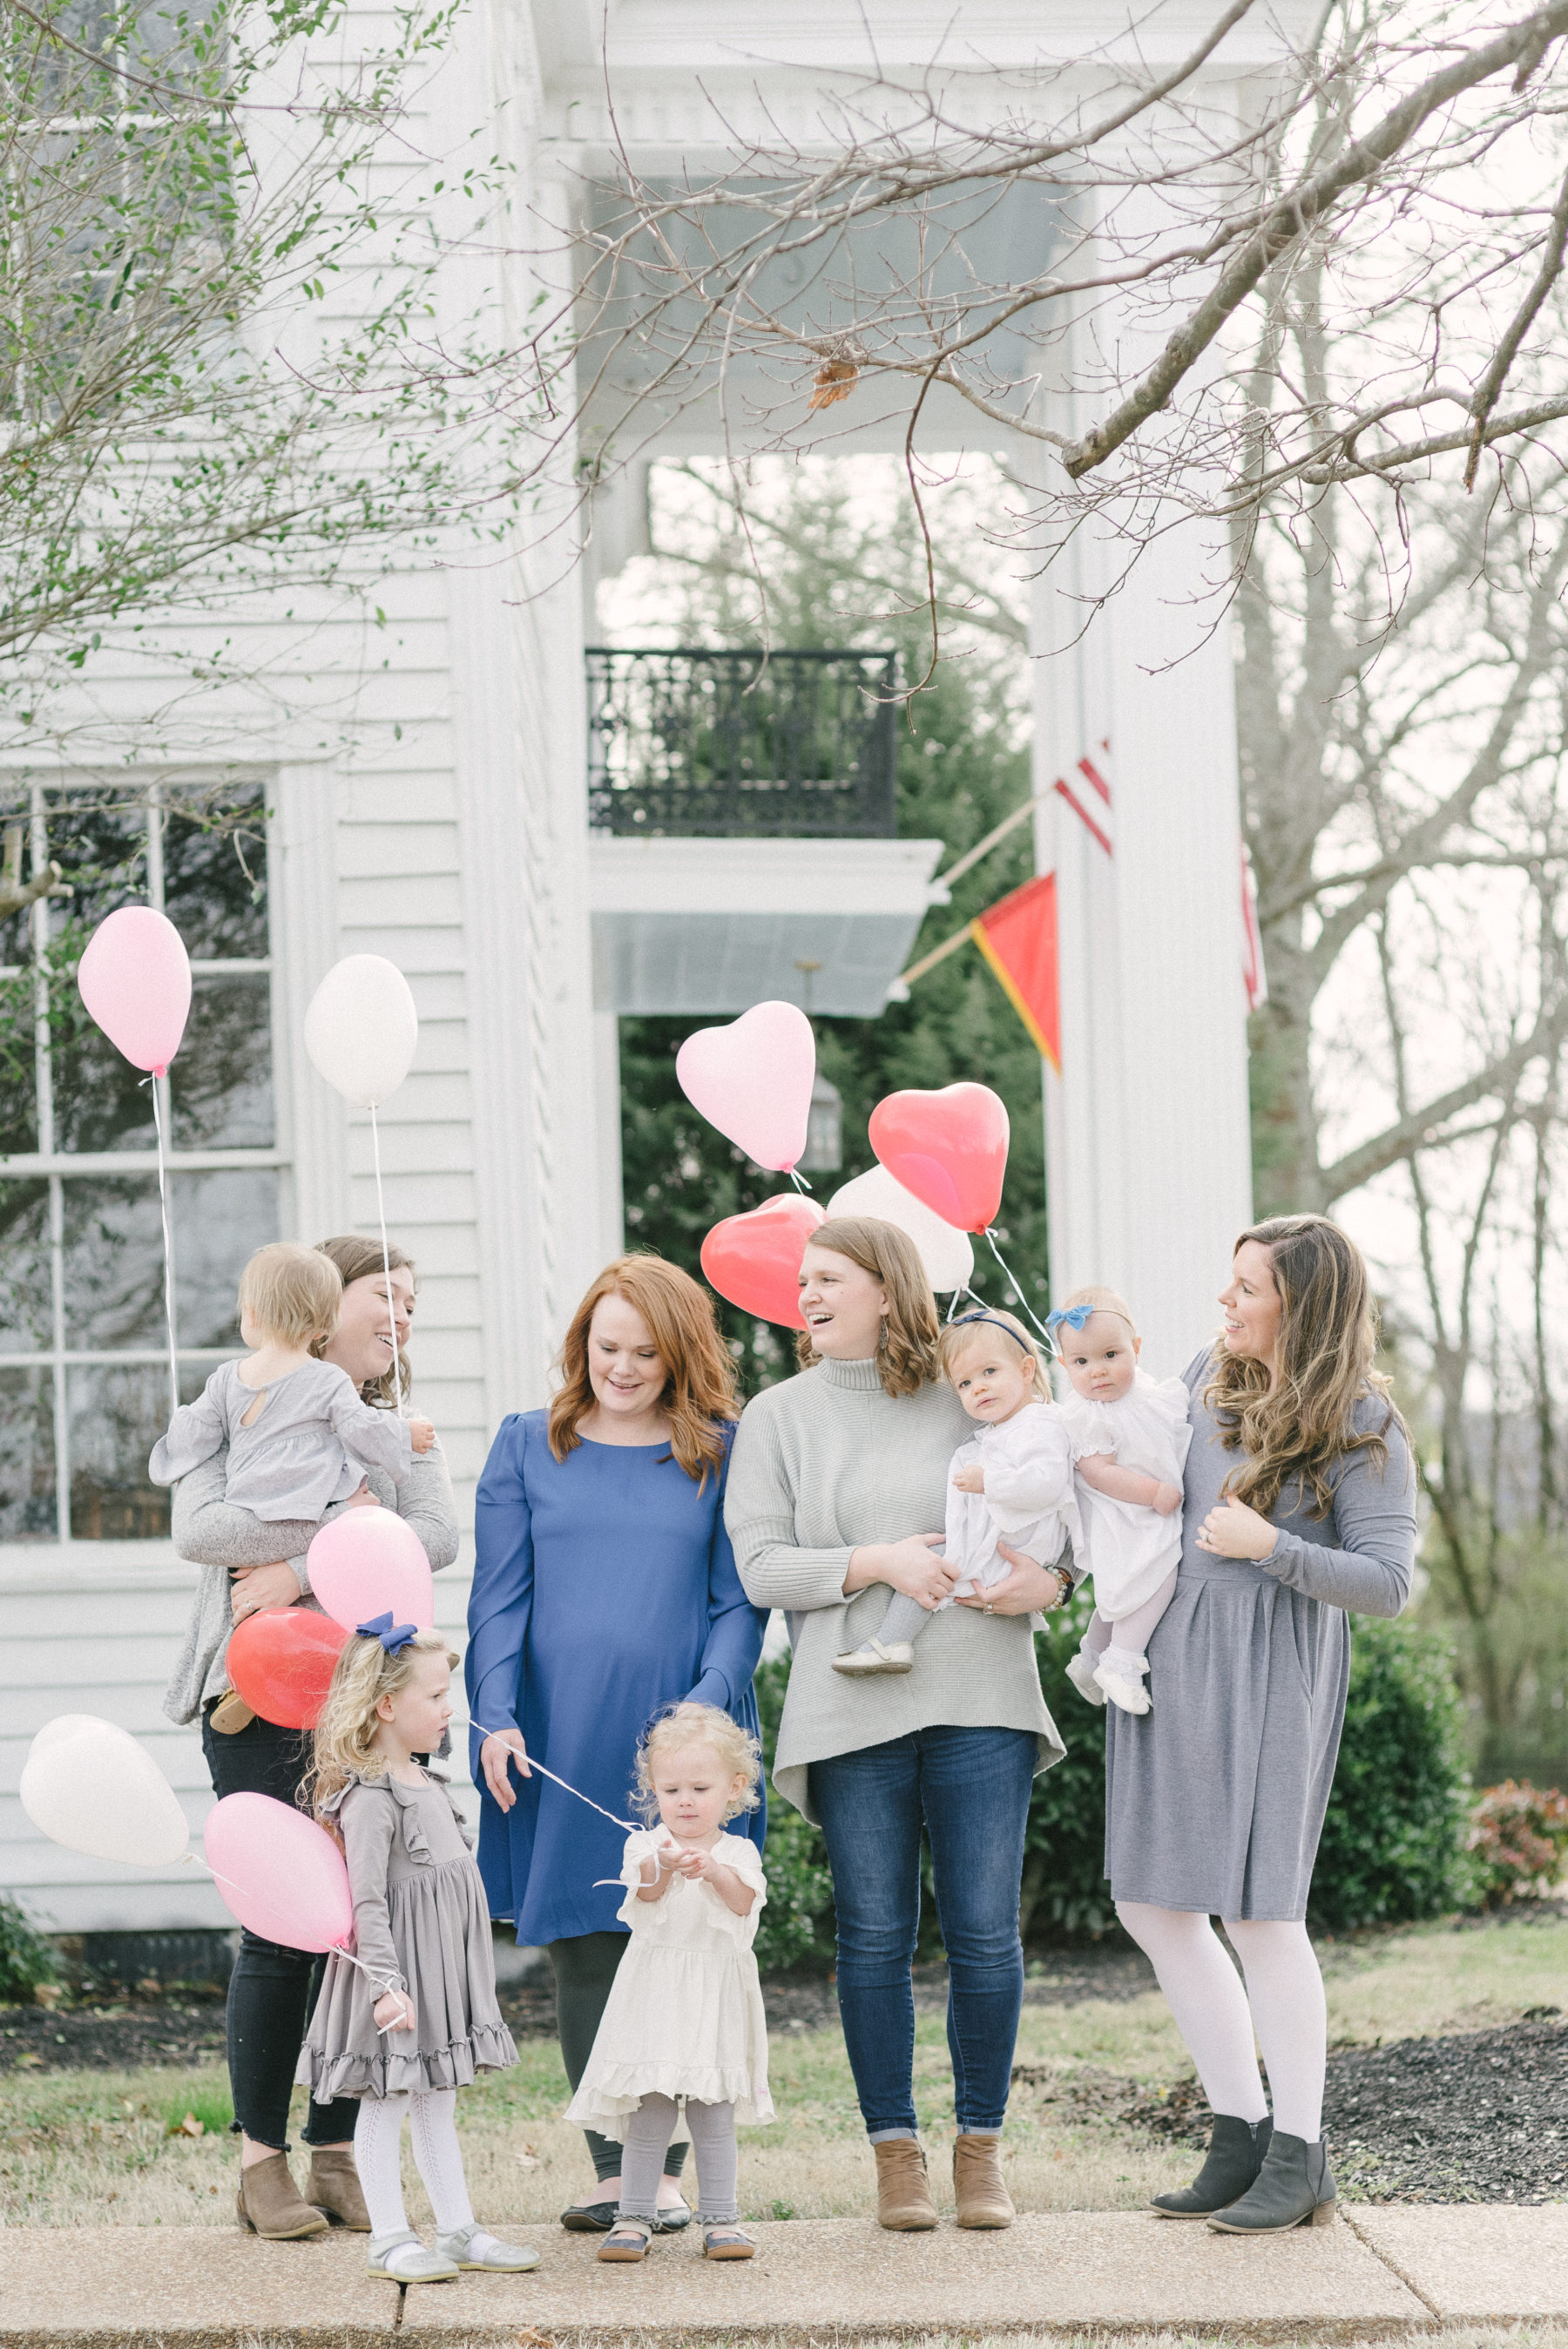 Dolly Delong Family Photo Inspiration featured on Nashville Baby Guide